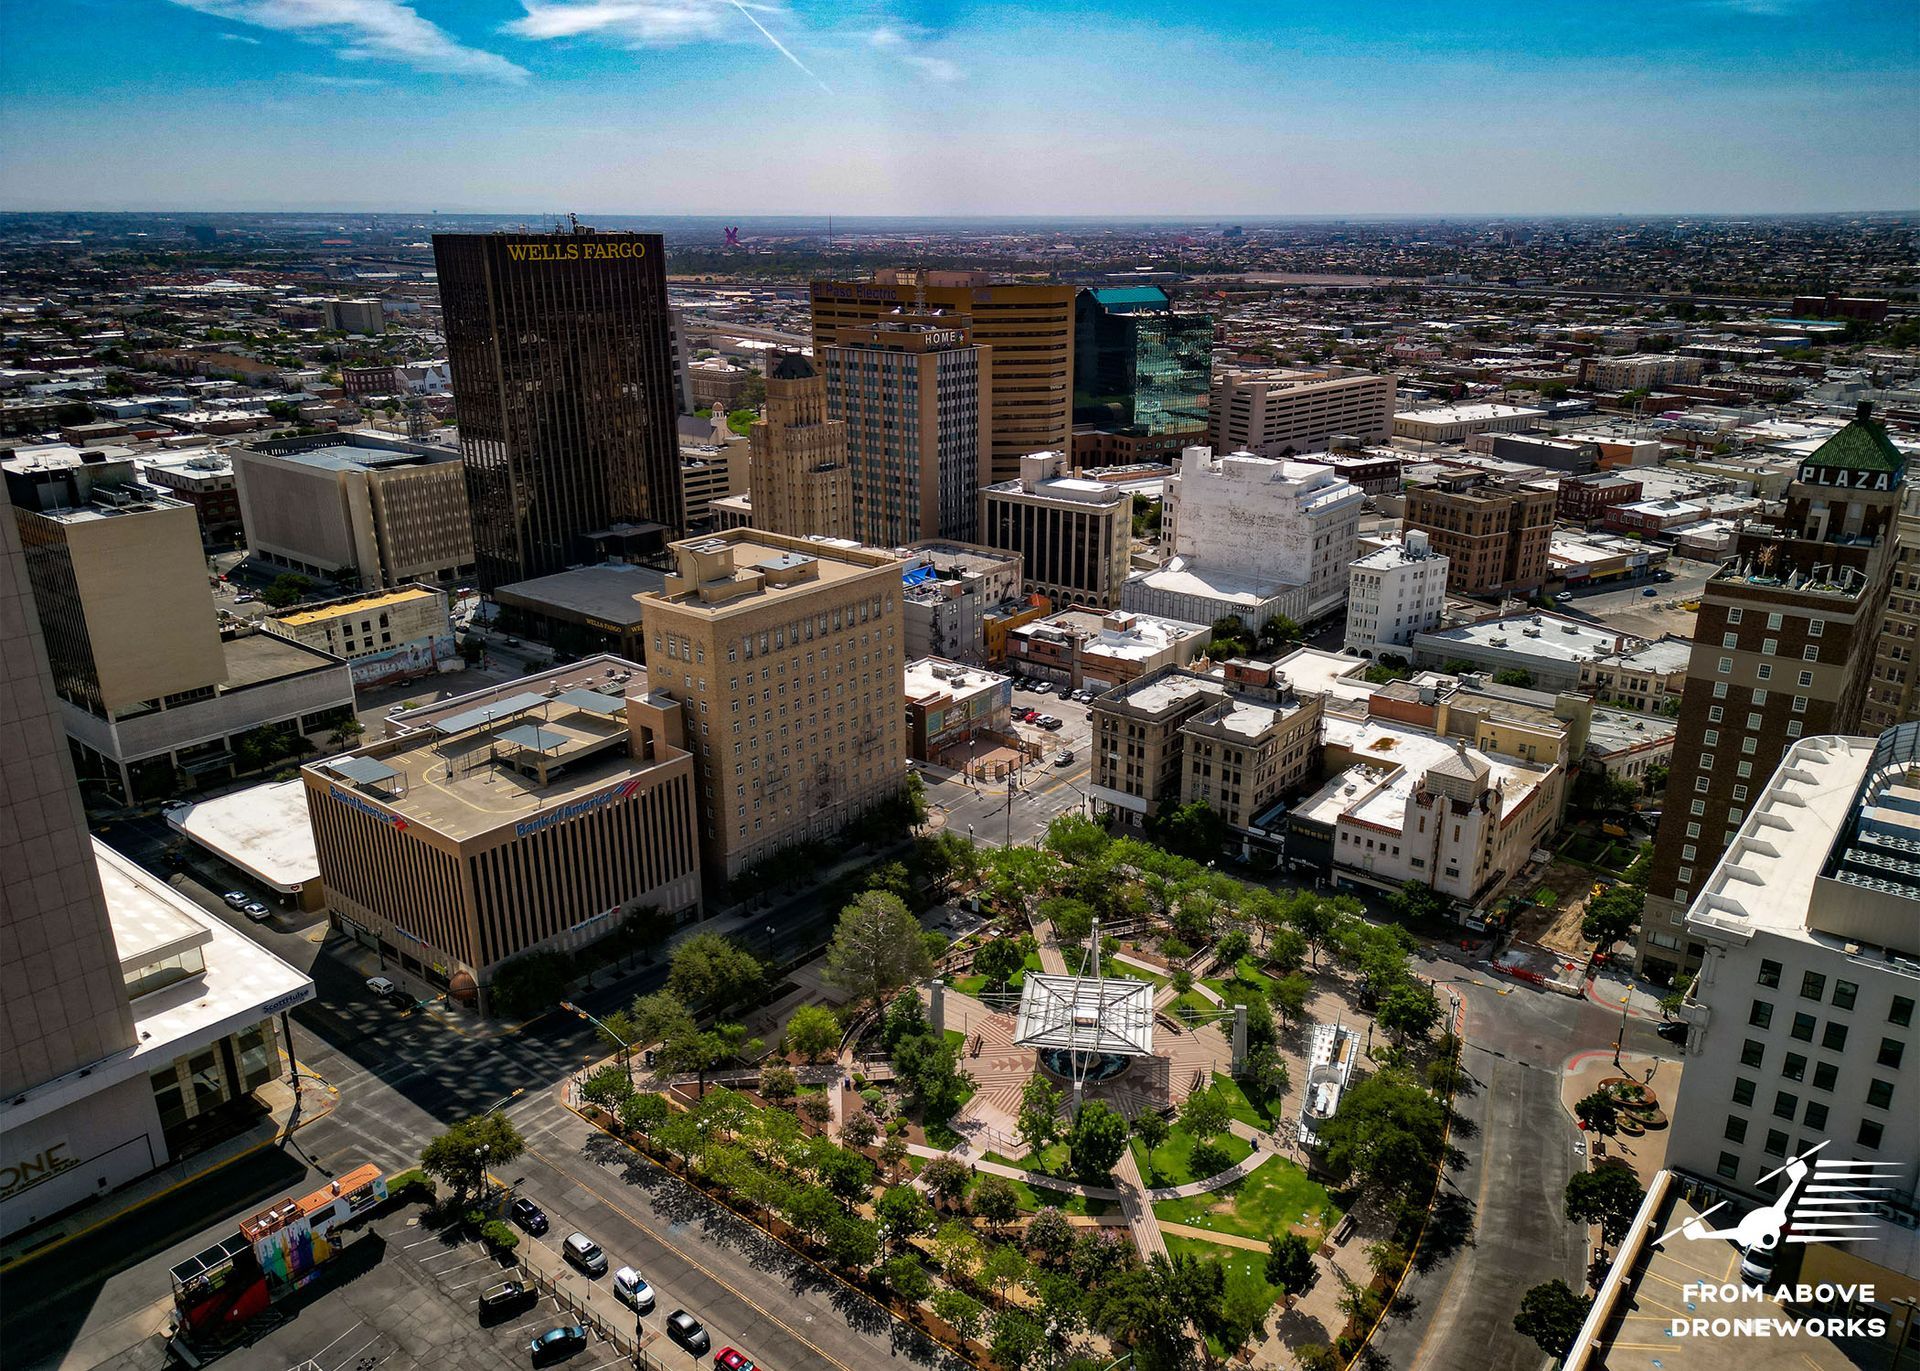 Downtown El Paso, Texas Aerial View: An aerial photograph capturing the cityscape of Downtown El Paso, Texas. The image showcases the skyline, streets, buildings, and urban landscape of the downtown area.